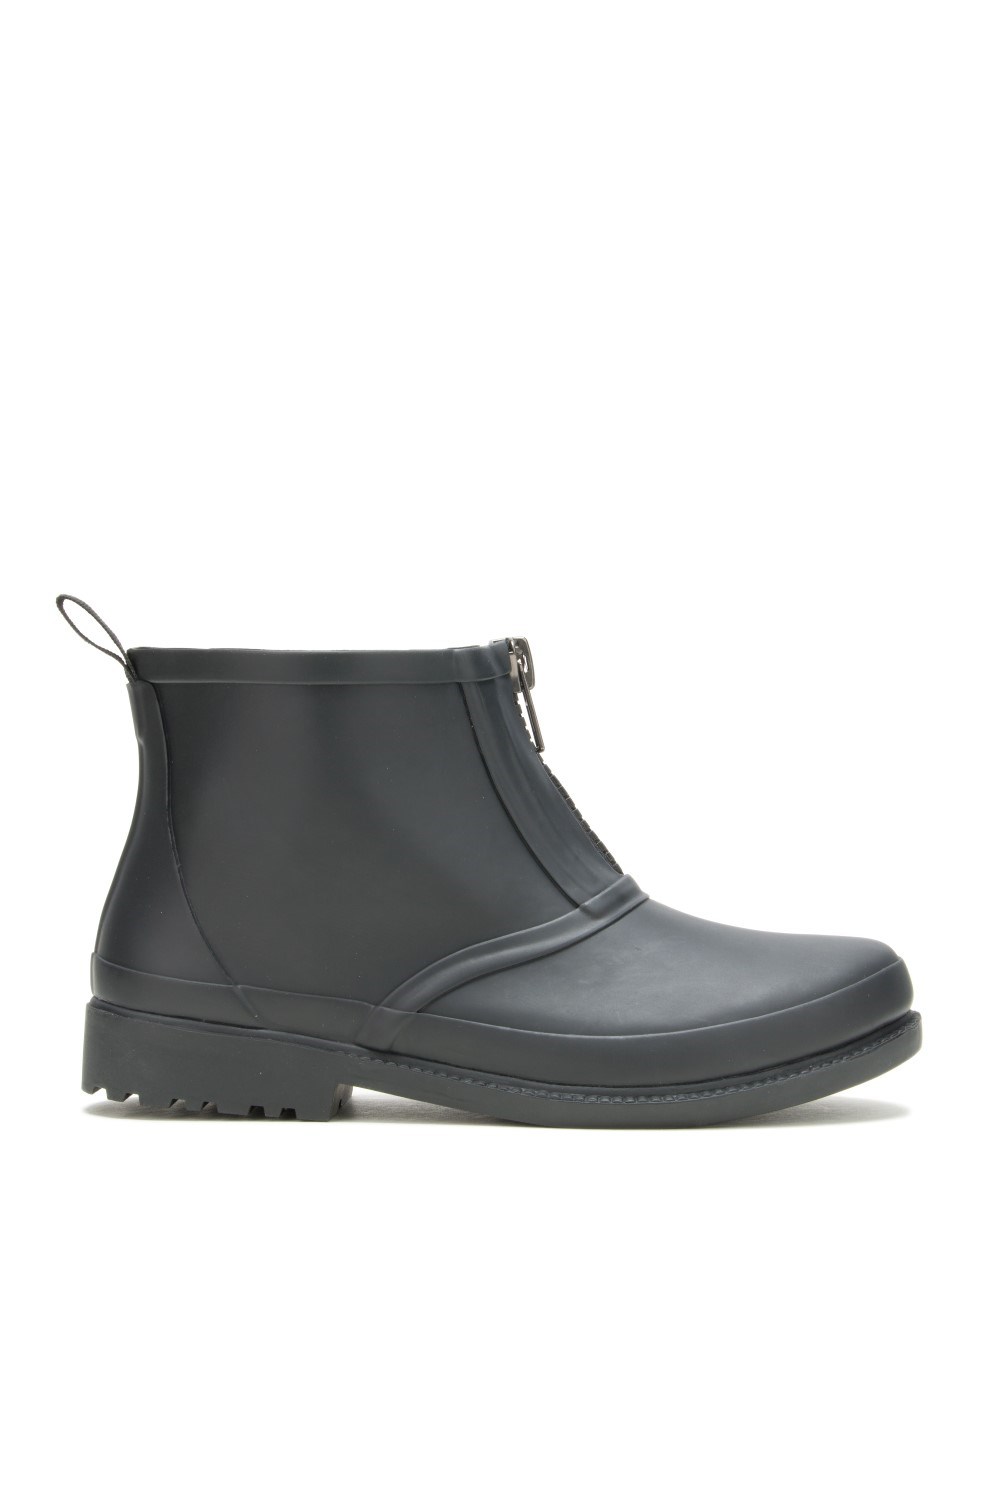 Nicky Womens Ankle Rain Boots -